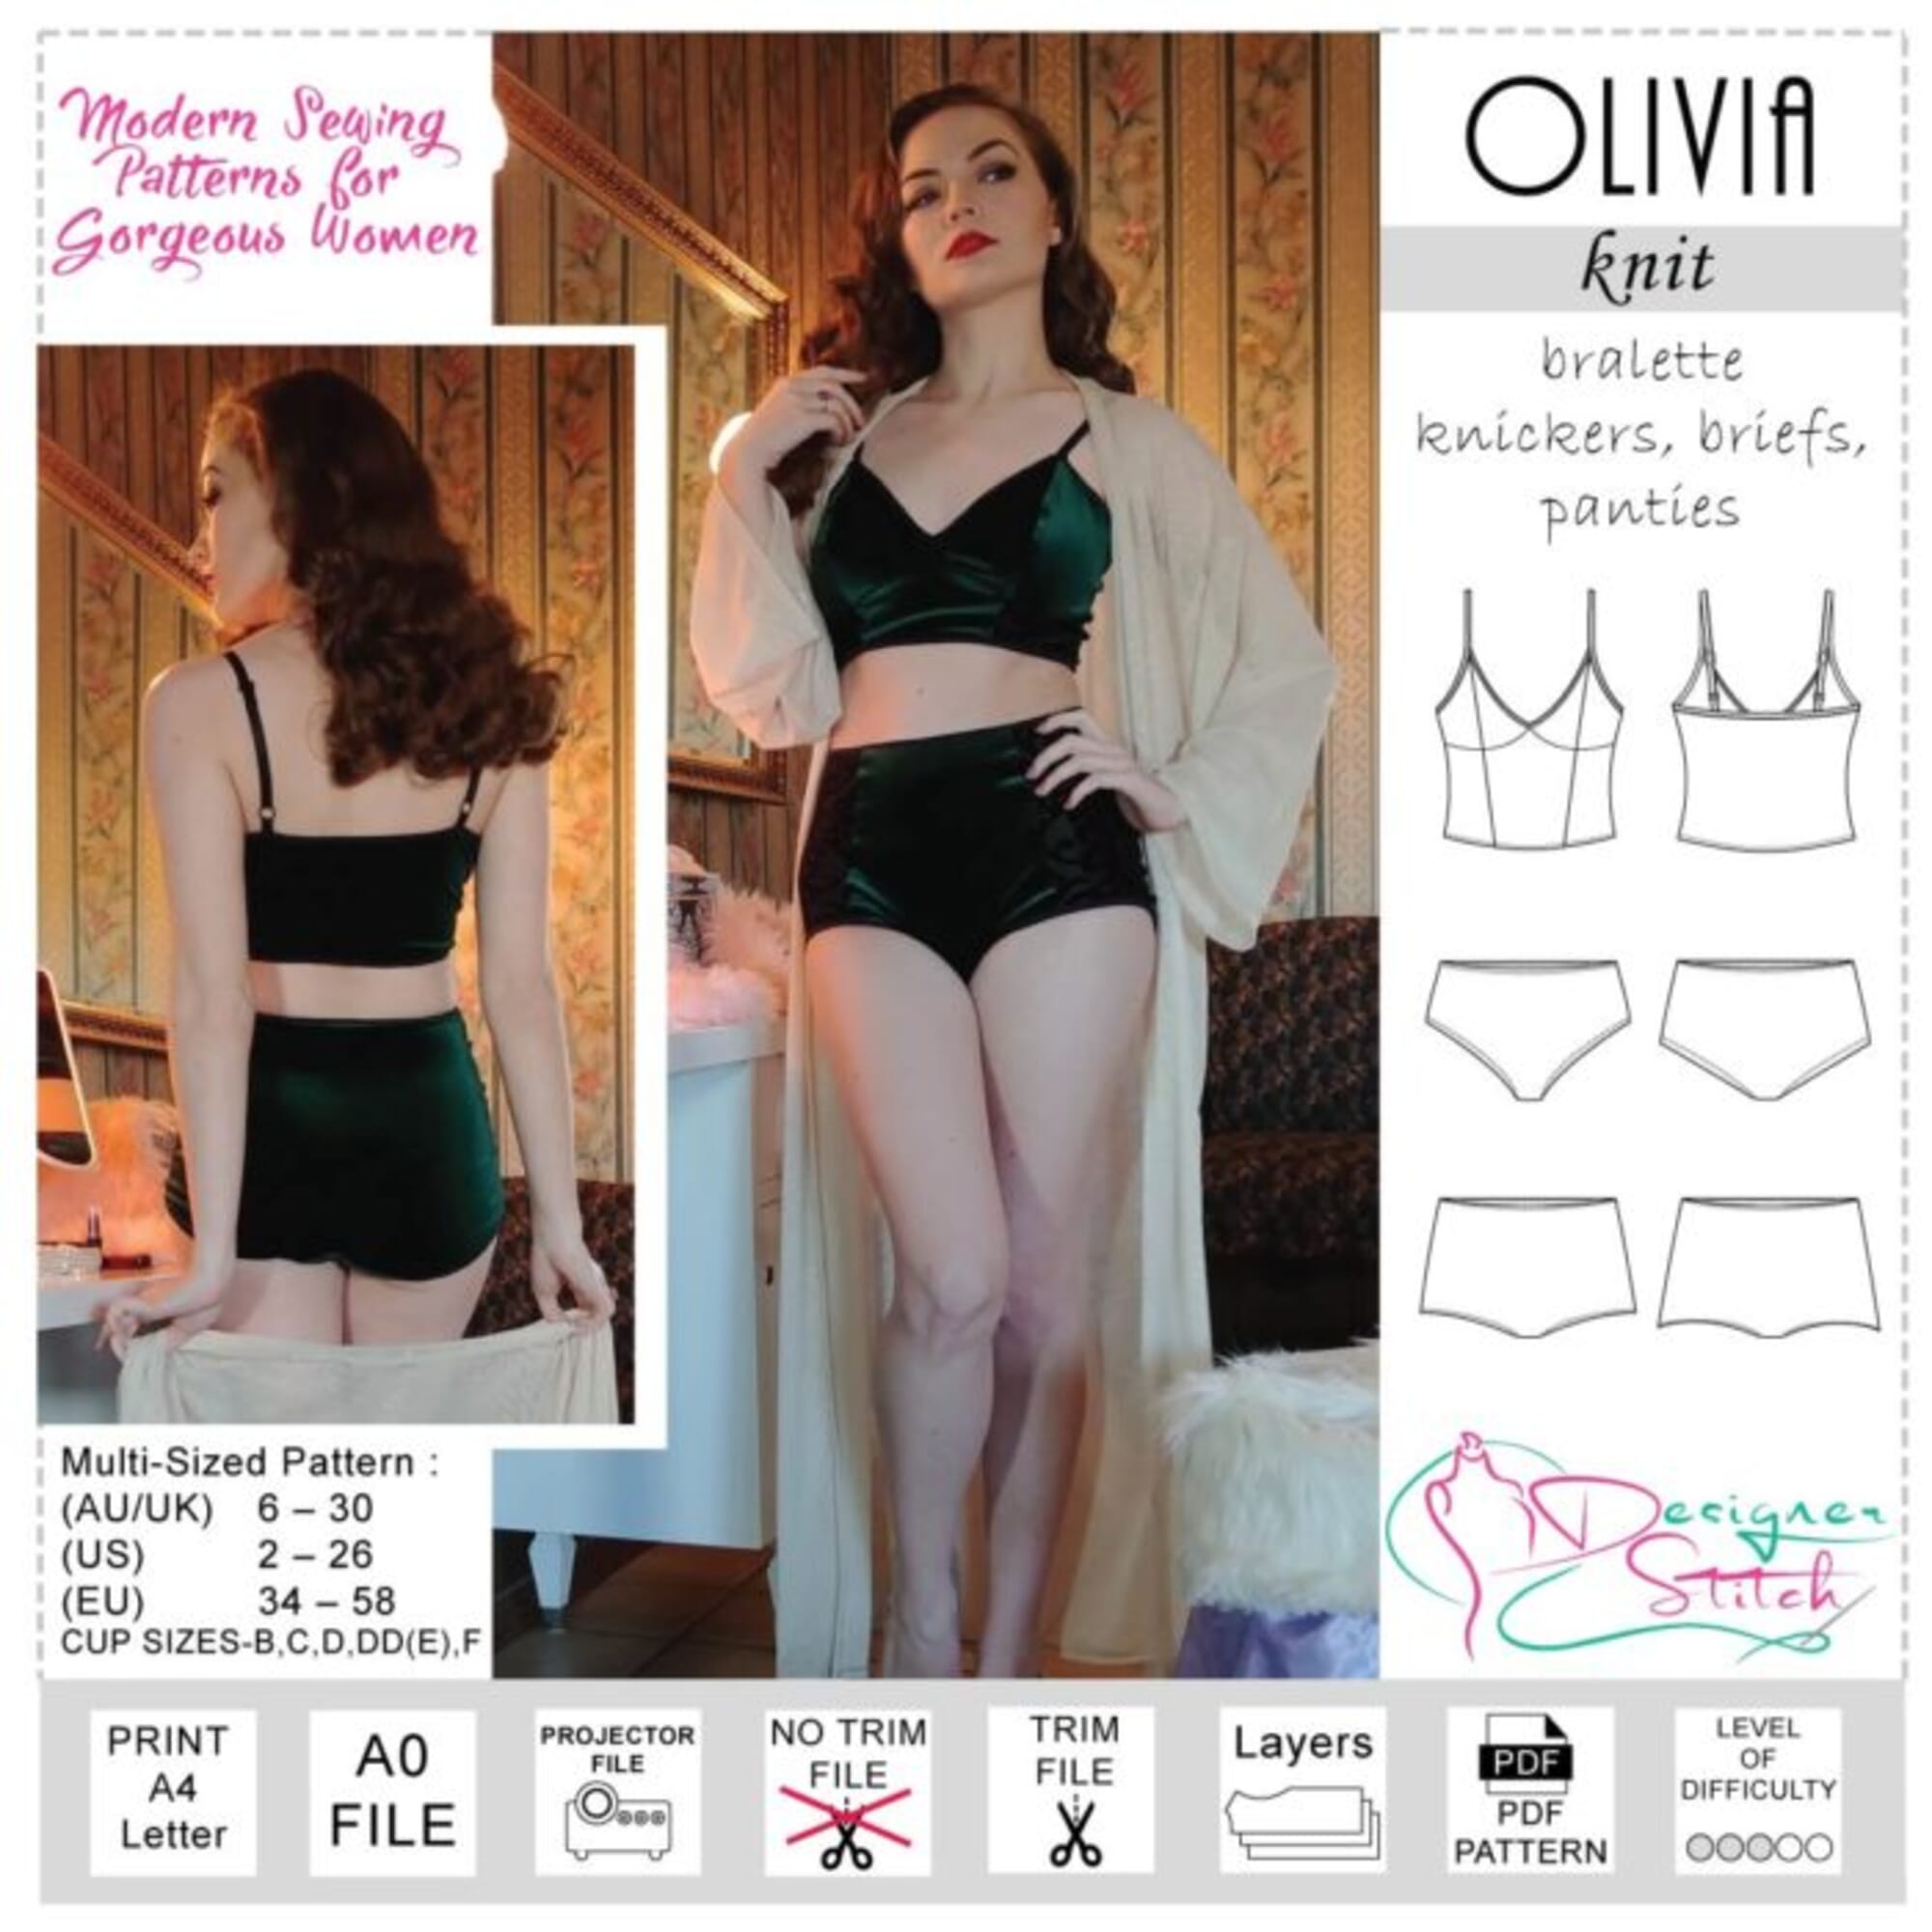 https://nusholmo.sirv.com/item/images/1022324711/full/Olivia-Bralette-Knickers-Briefs-Panties-PDF-Sewing-Pattern-Face-1-700x700.jpg?scale.width=2000&scale.height=2000